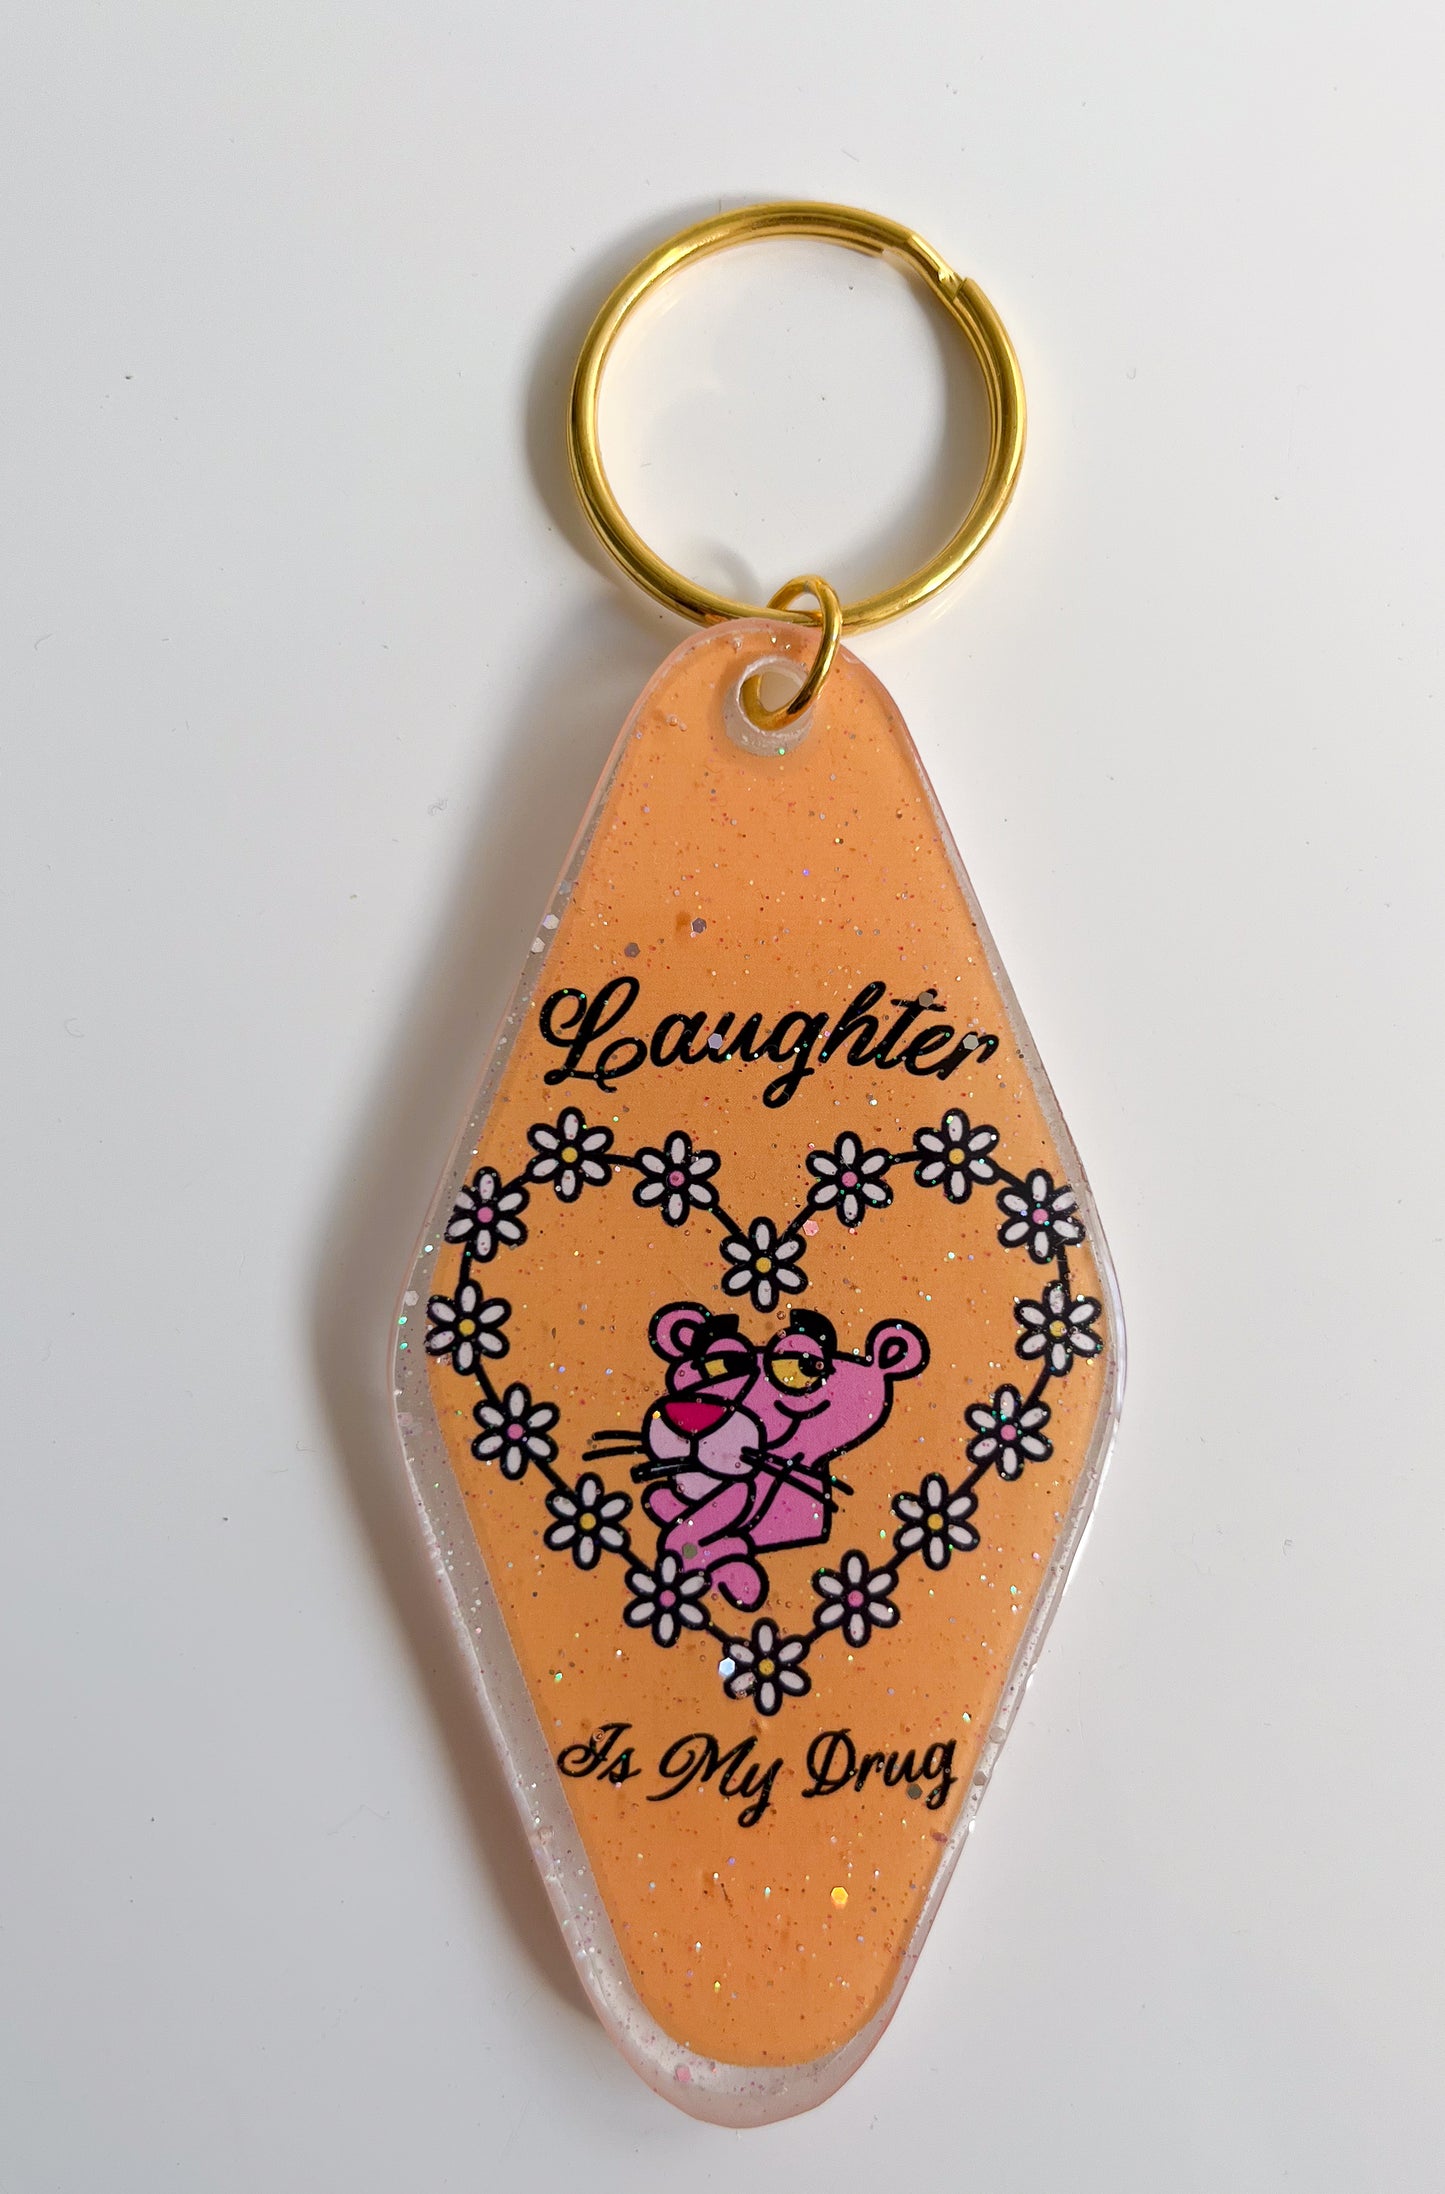 Laughter is my drug- Hotel Keychain